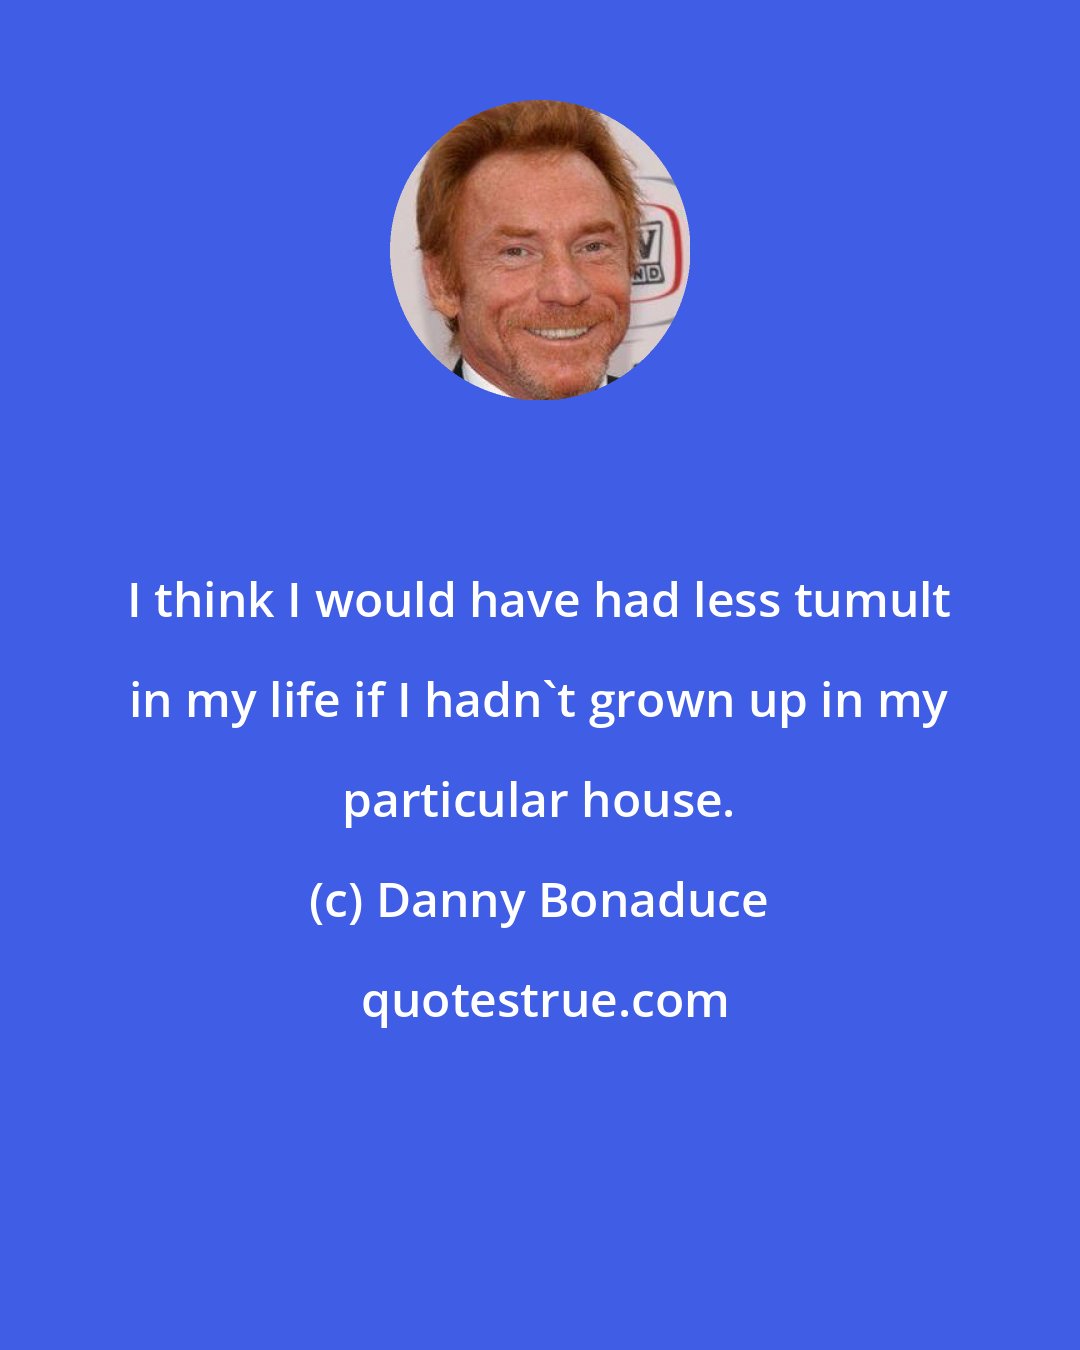 Danny Bonaduce: I think I would have had less tumult in my life if I hadn't grown up in my particular house.